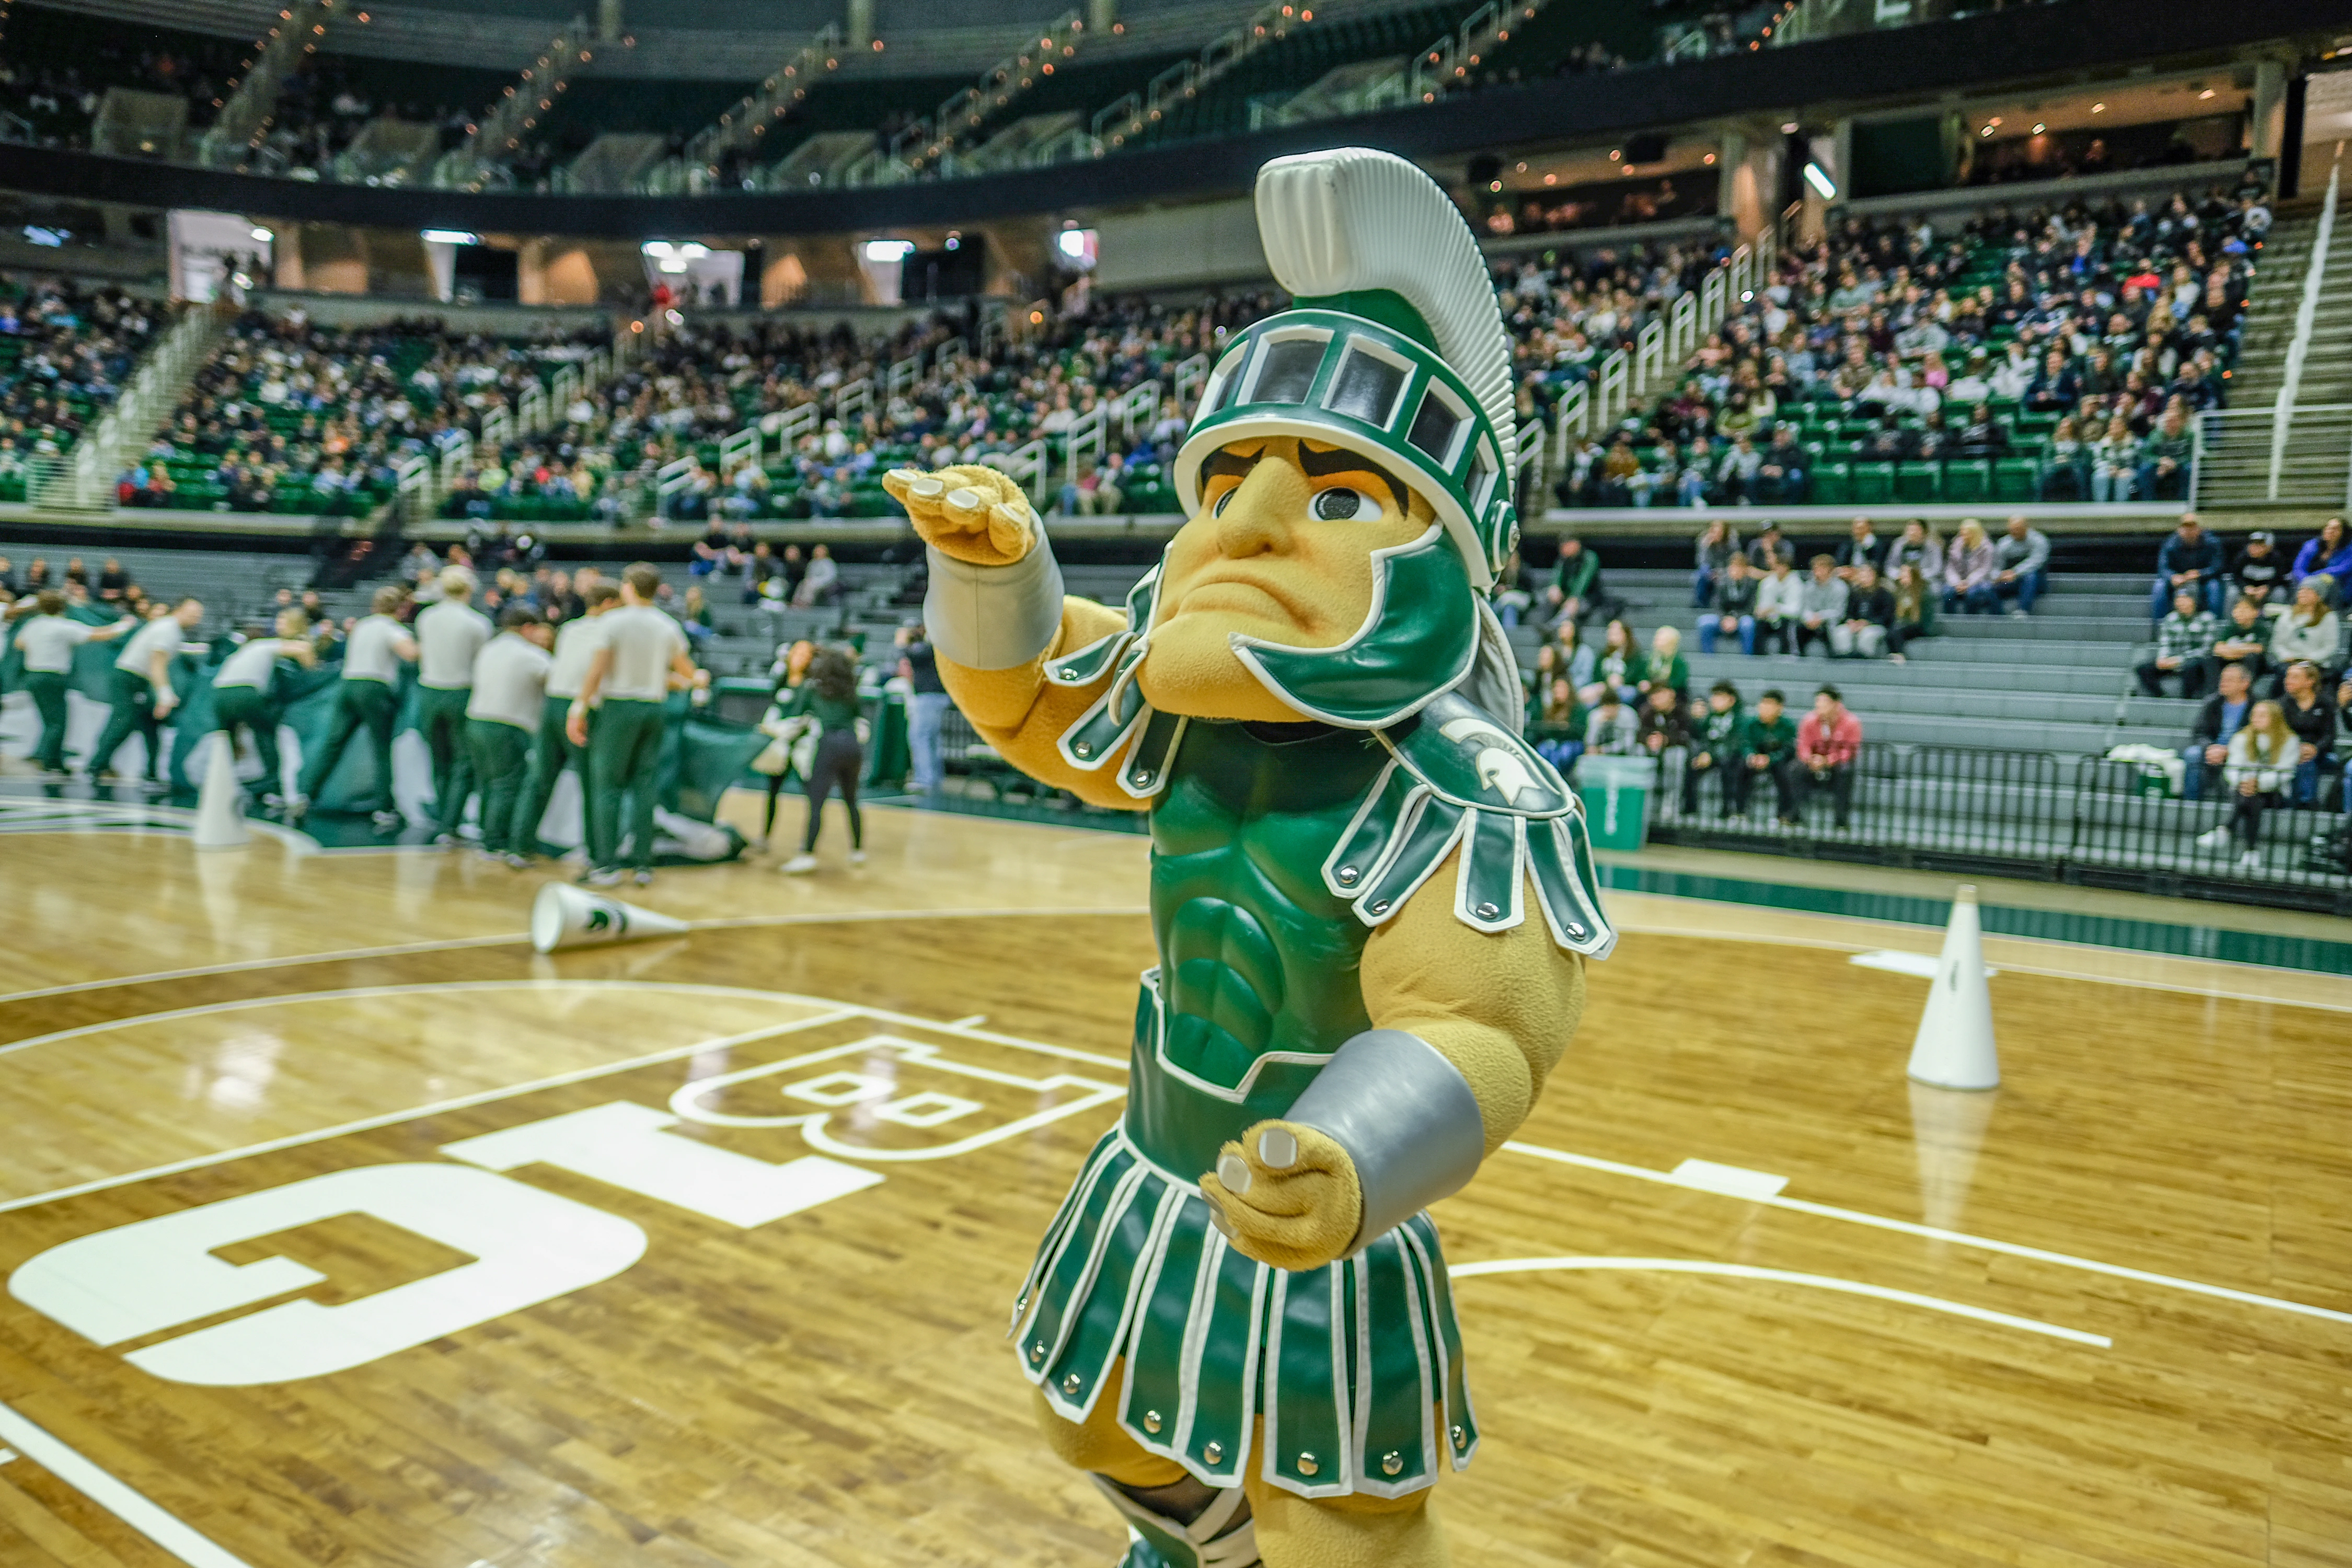 Sparty at Admitted Student Day in the Breslin Center